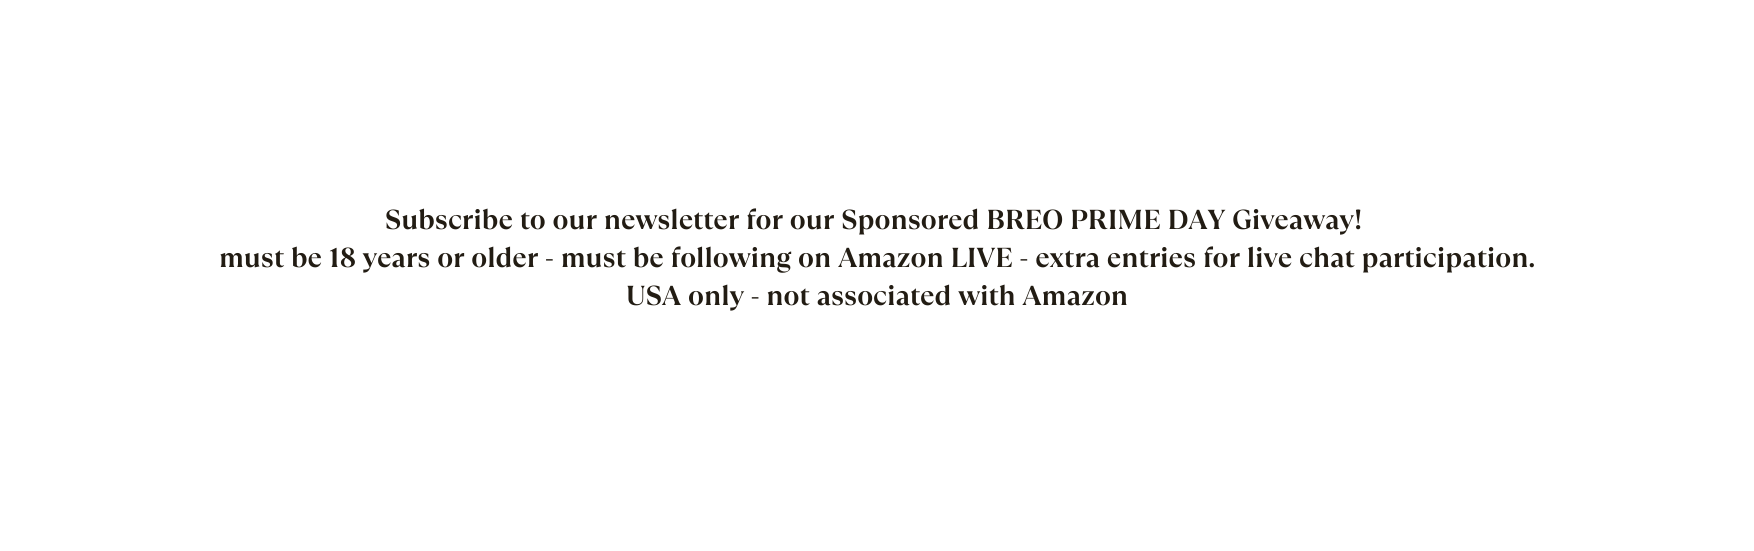 Subscribe to our newsletter for our Sponsored BREO PRIME DAY Giveaway must be 18 years or older must be following on Amazon LIVE extra entries for live chat participation USA only not associated with Amazon